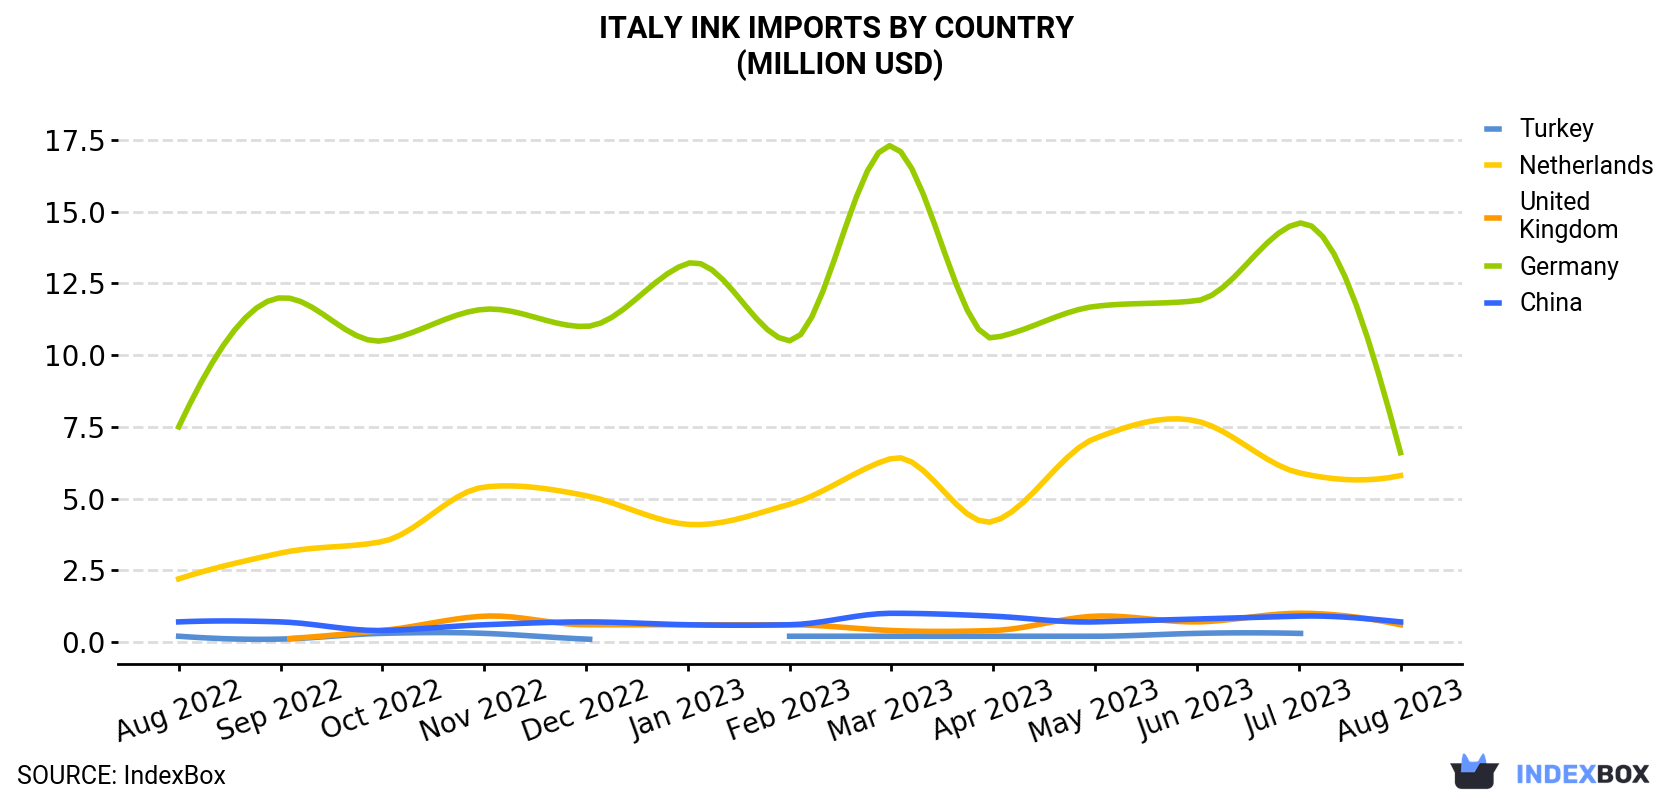 Italy Ink Imports By Country (Million USD)